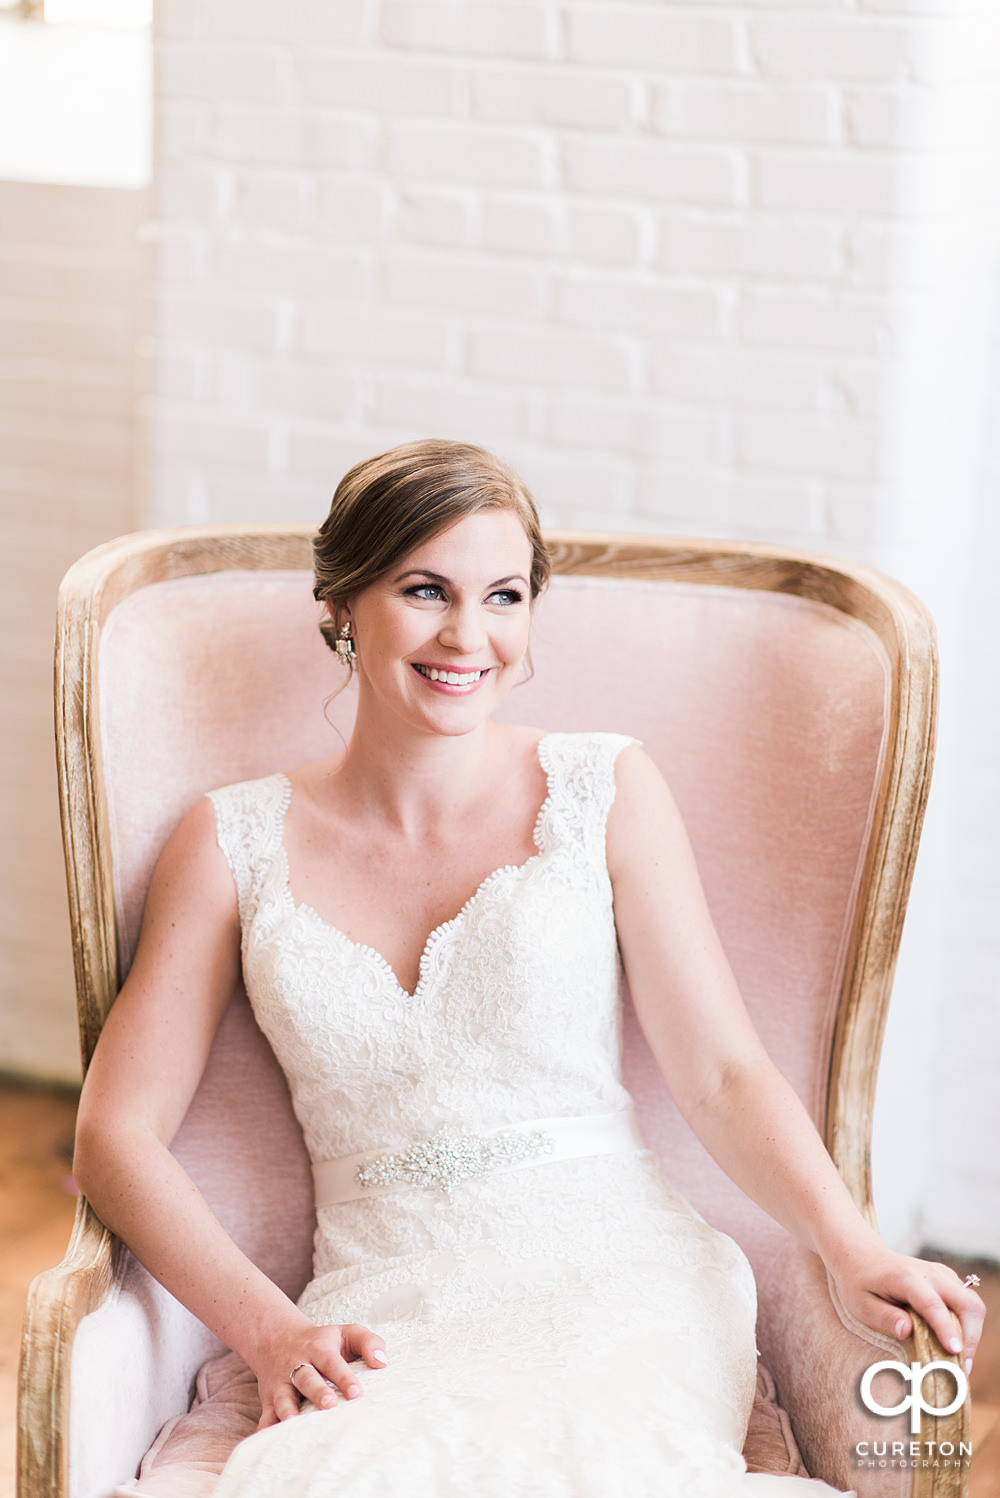 Bride laughing during her bridal session.